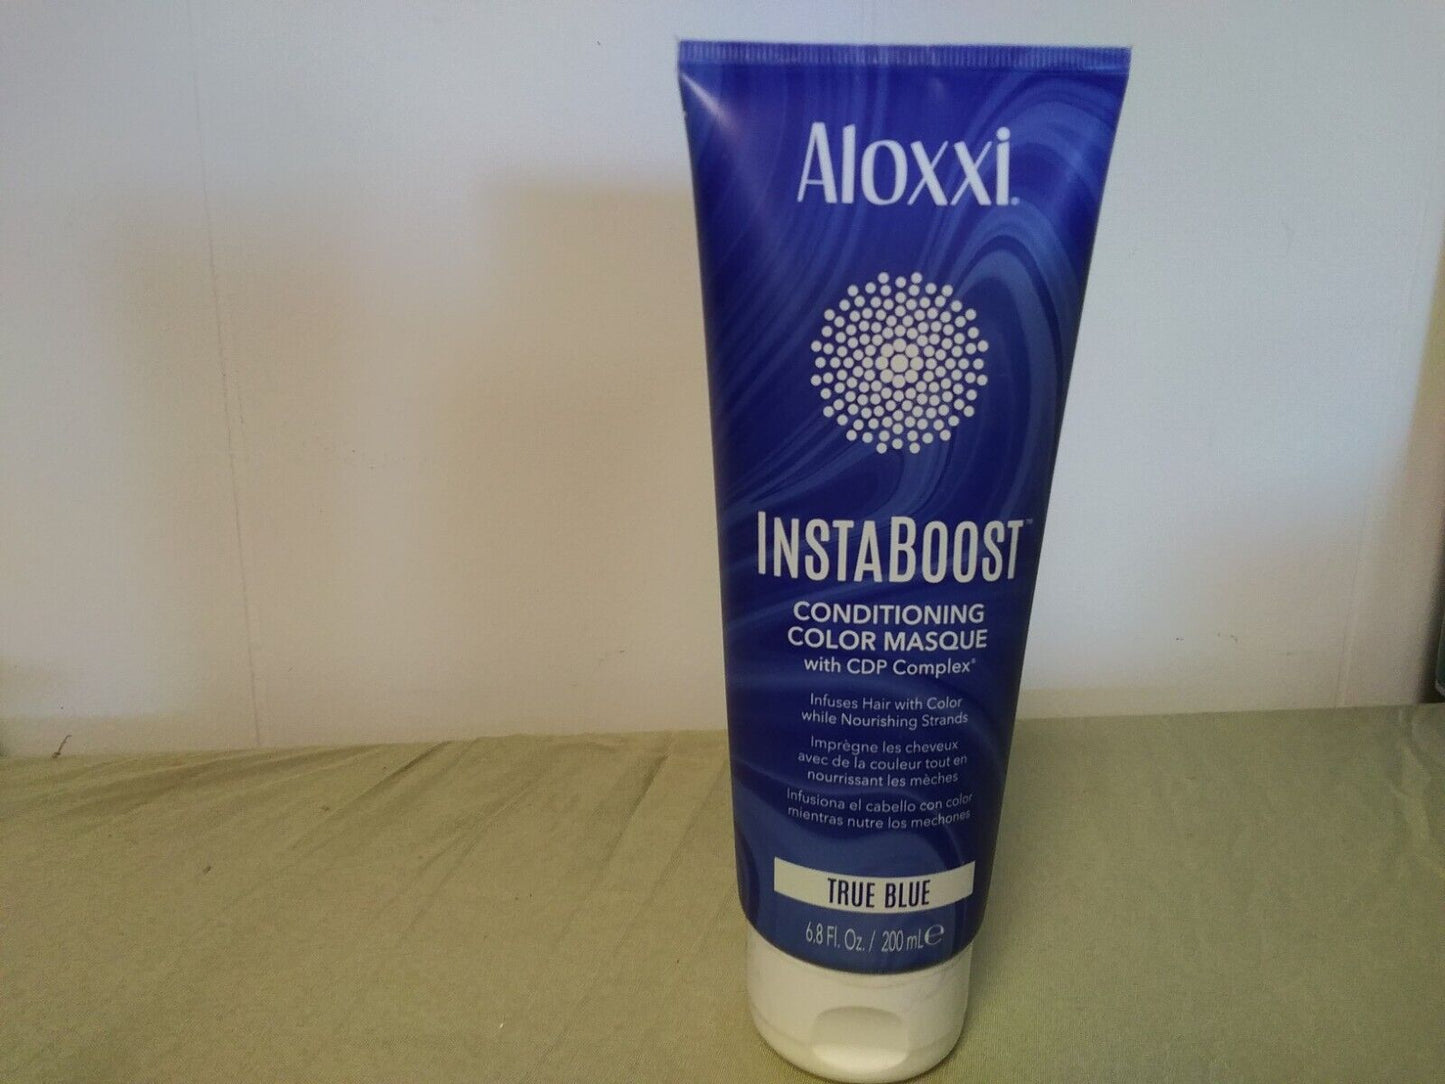 Aloxxi InsaBoost Conditioning Color Masque with CDP Complex